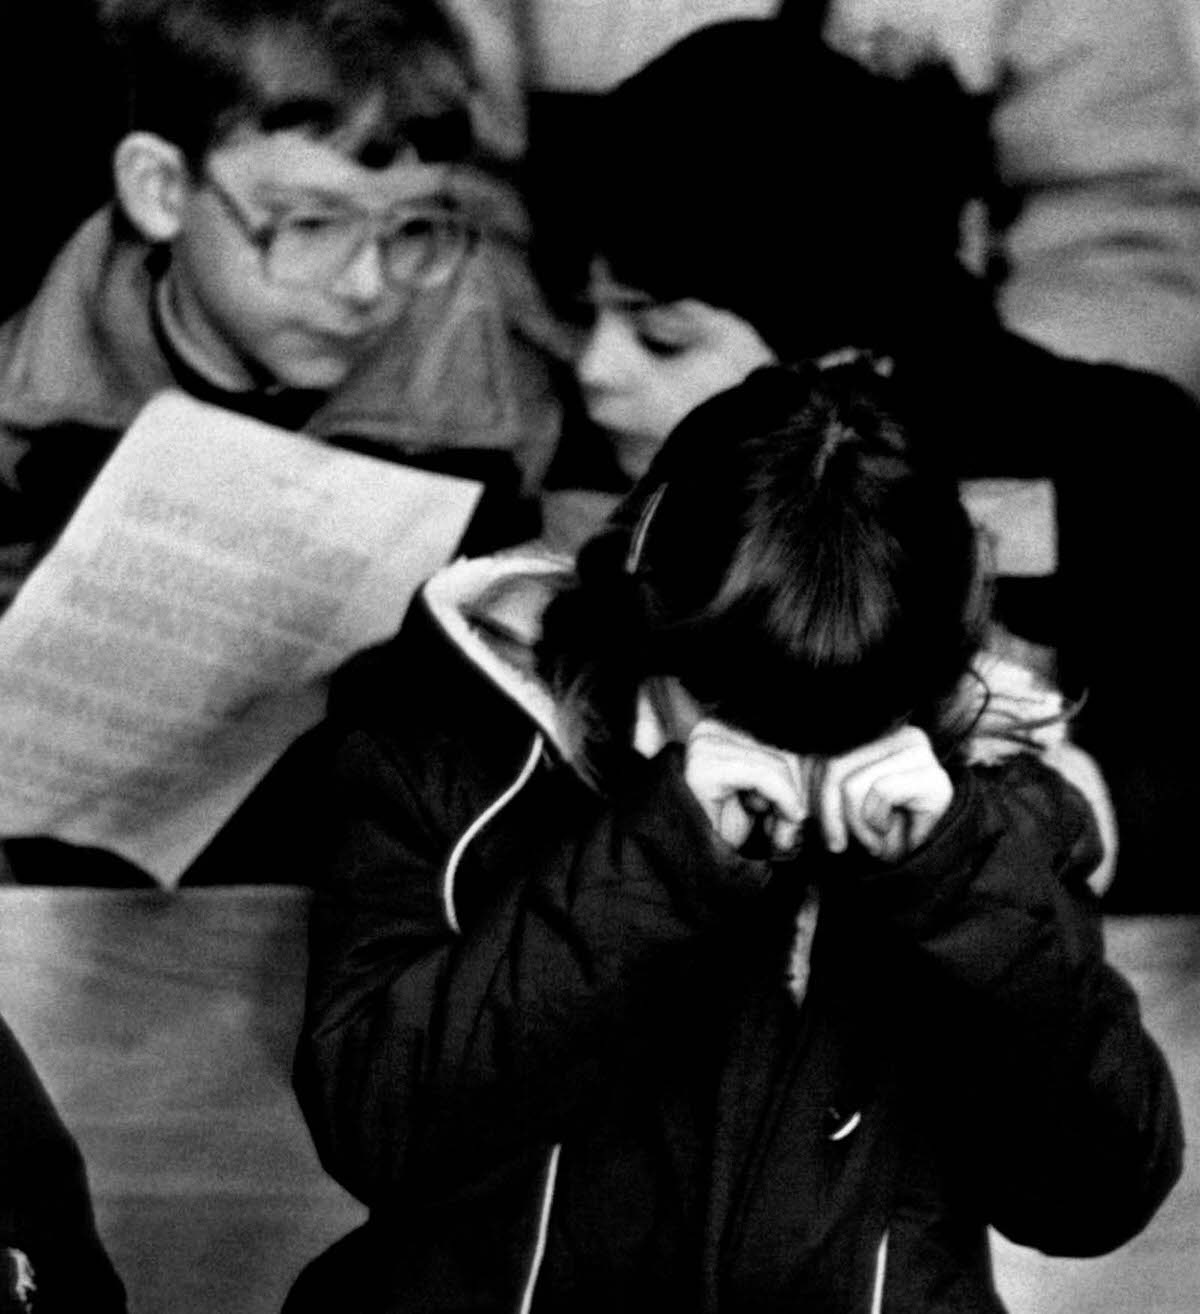 A child cries during a memorial service for Christa McAuliffe at a church in Concord, New Hampshire.